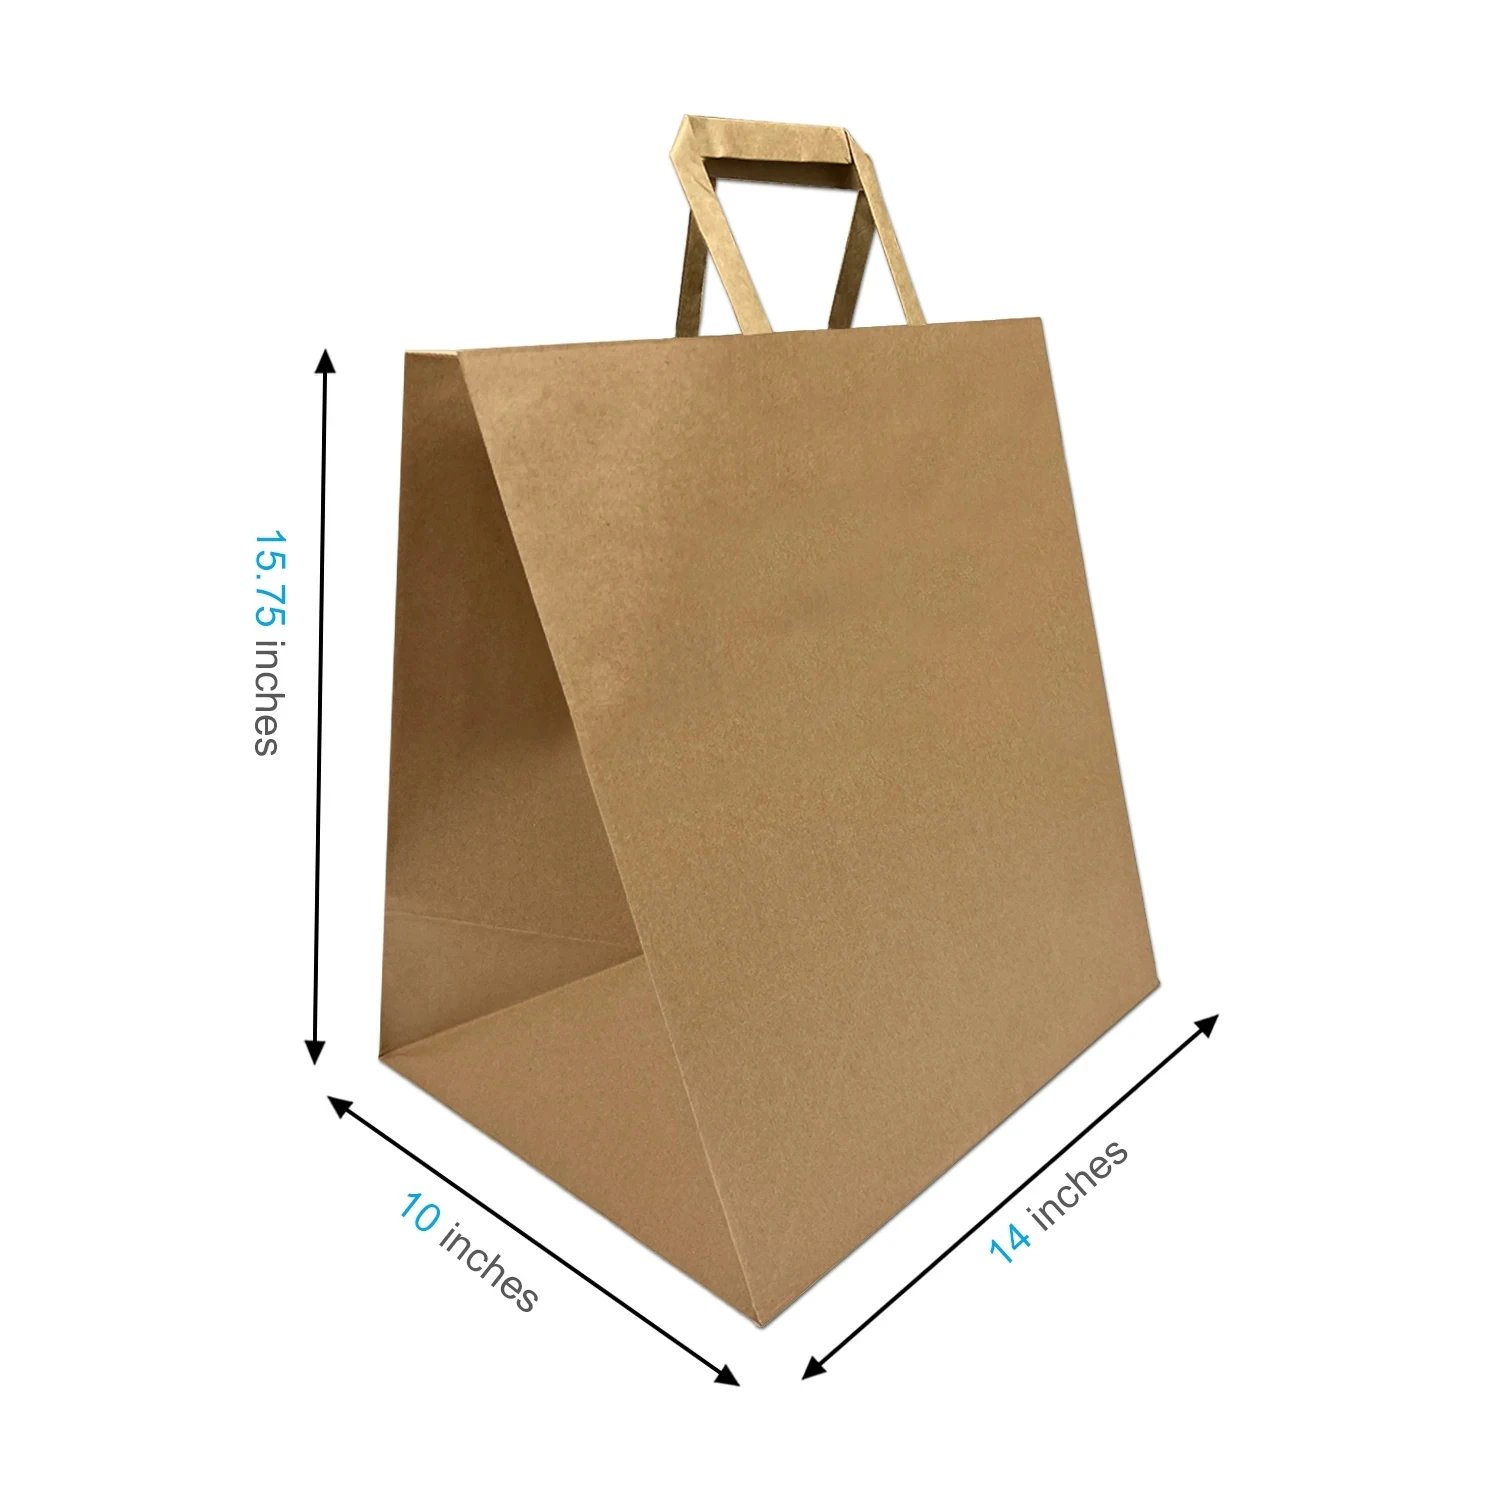 Kraft Paper Bags with Flat Handles 14x10<i></i>x15.75 inches